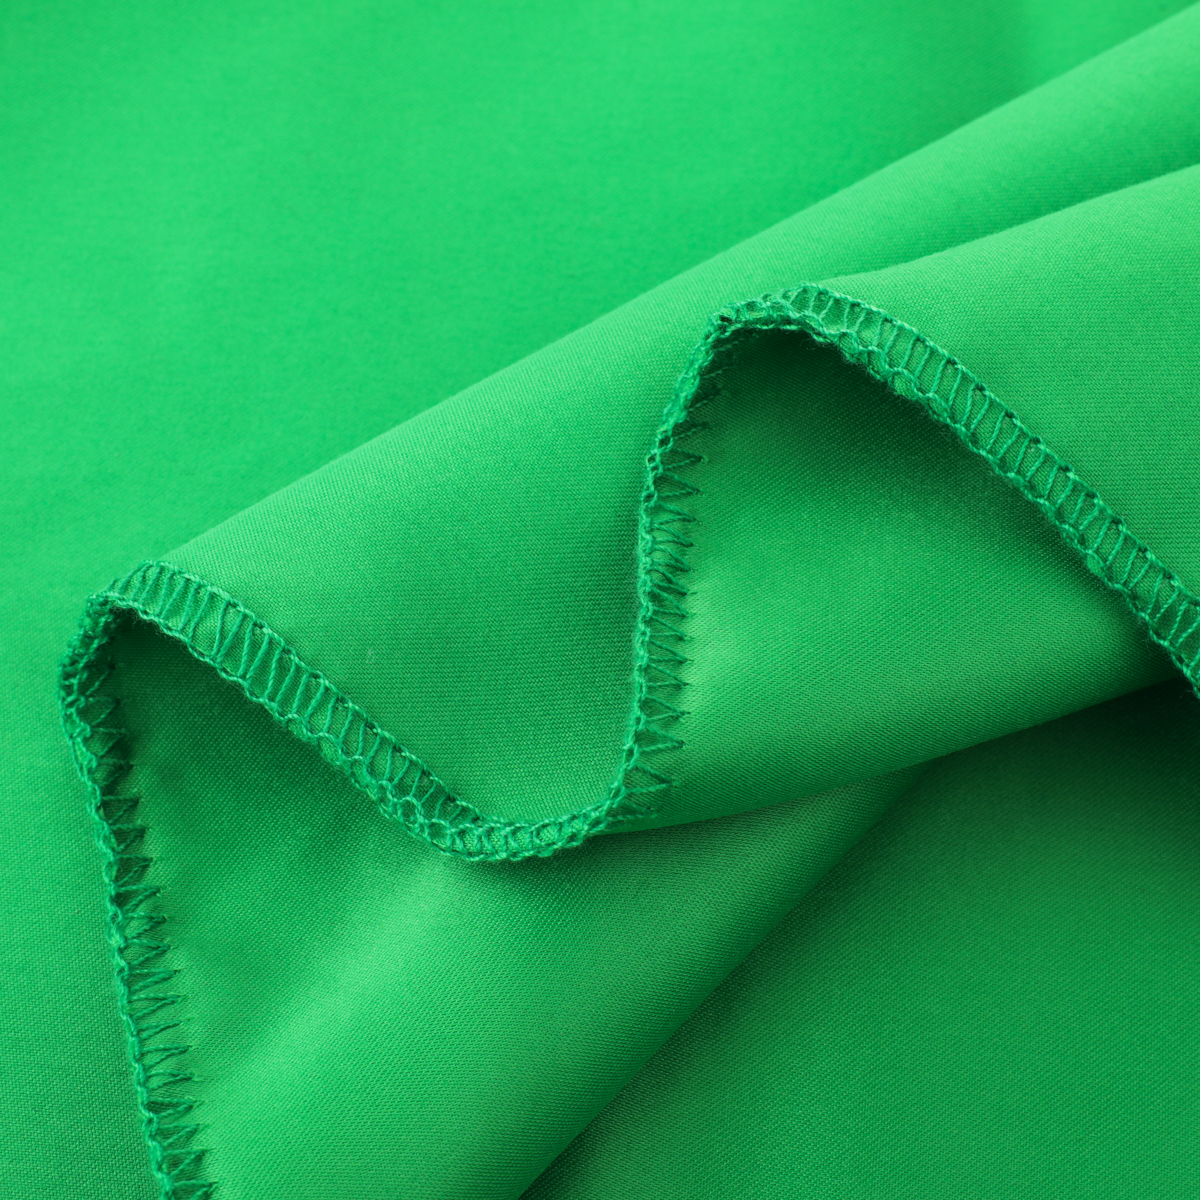 7x5FT-Green-Photography-Backdrop-Background-Studio-Photography-Prop-1632882-5